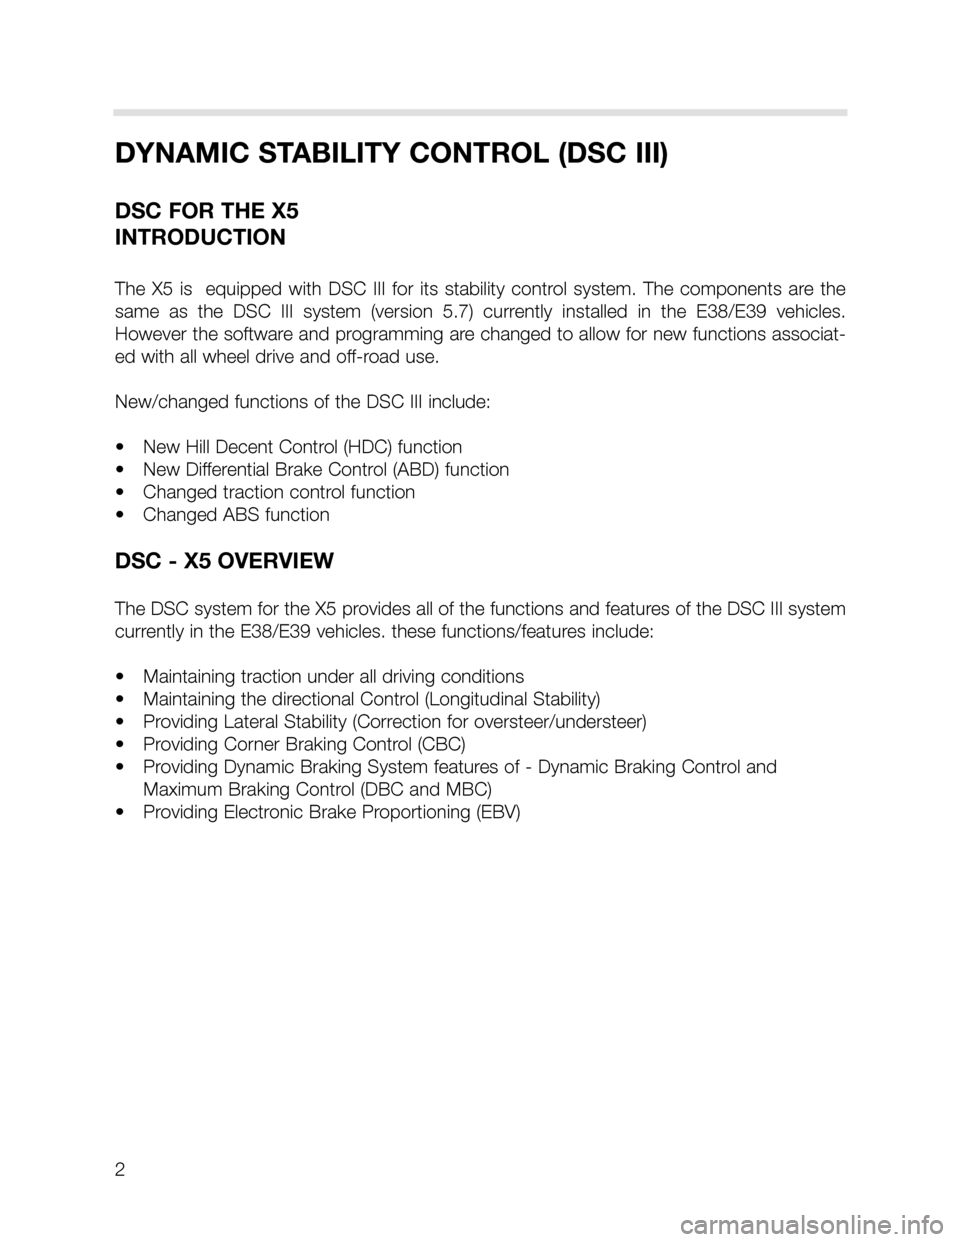 BMW X5 2004 E53 DSC System Workshop Manual 2
DYNAMIC STABILITY CONTROL (DSC III)
DSC FOR THE X5
INTRODUCTION
The  X5  is    equipped  with  DSC  III  for  its  stability  control  system.  The  components  are  the
same  as  the  DSC  III  sys